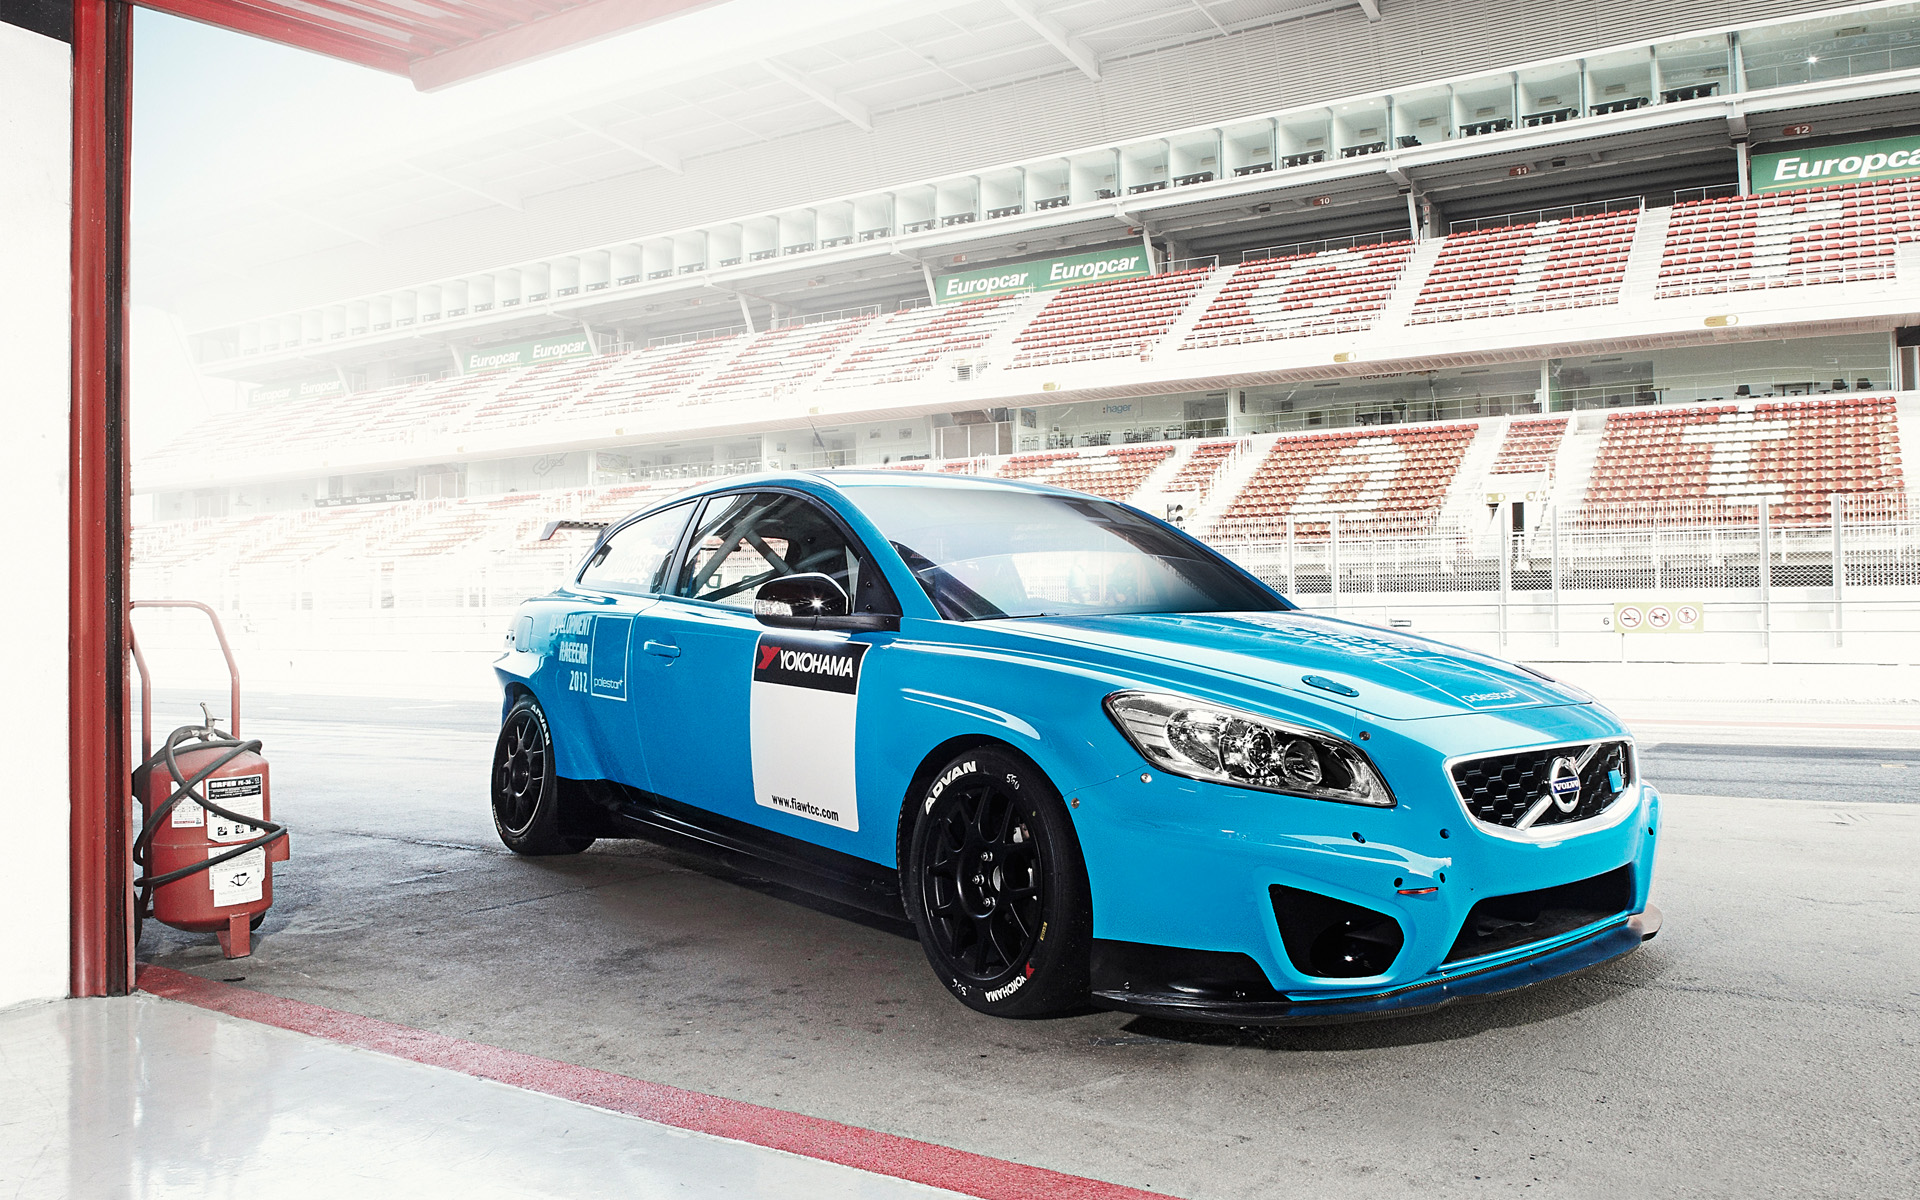 also featured on the Volvo C30 Polestar concept prototype car.